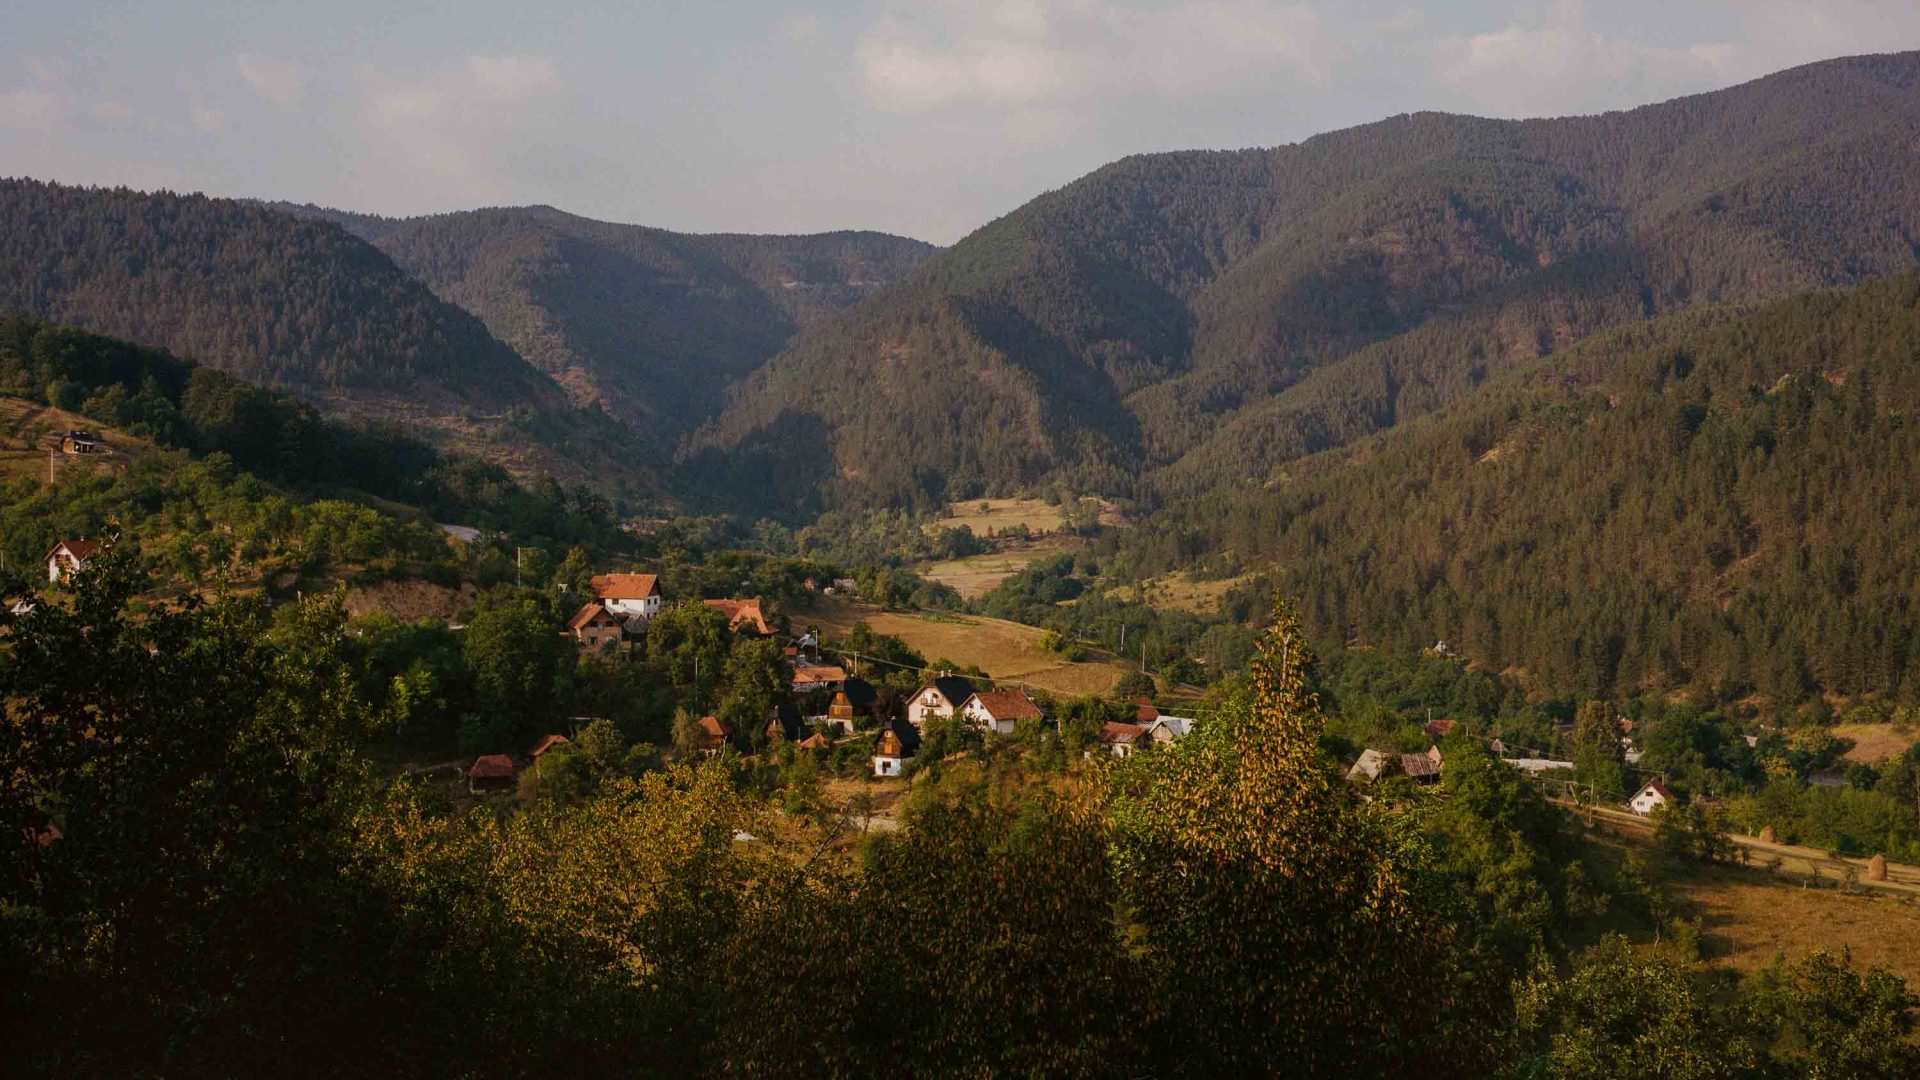 Mokragora, a town surrounded by green mountains and valleys.